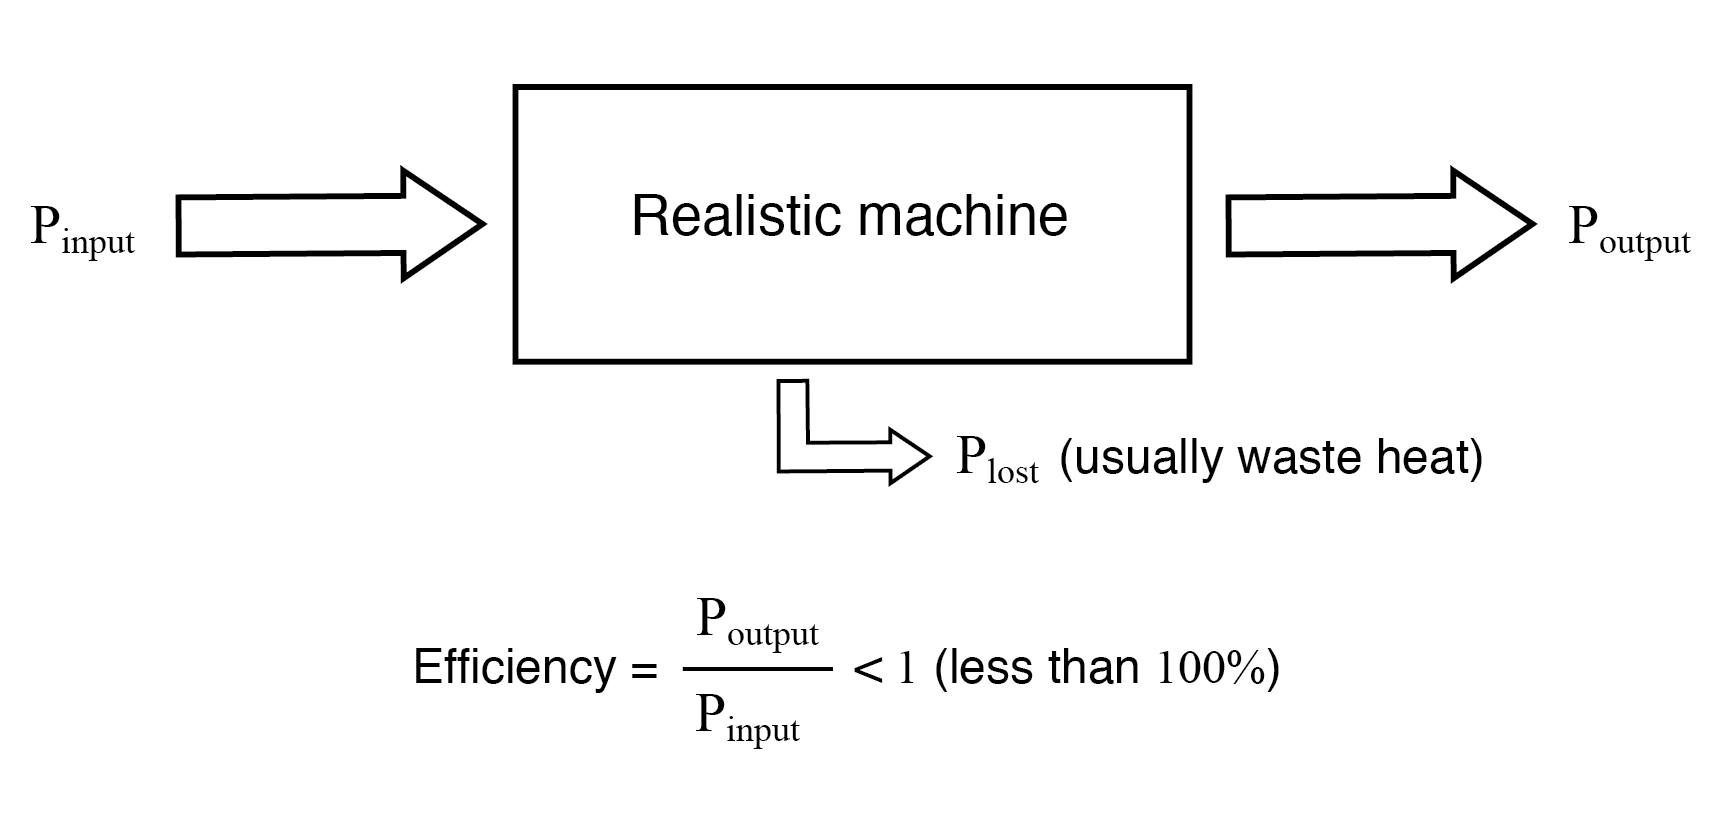 A realistic machine most often loses some of its input energy as heat in transforming it into the output energy stream.